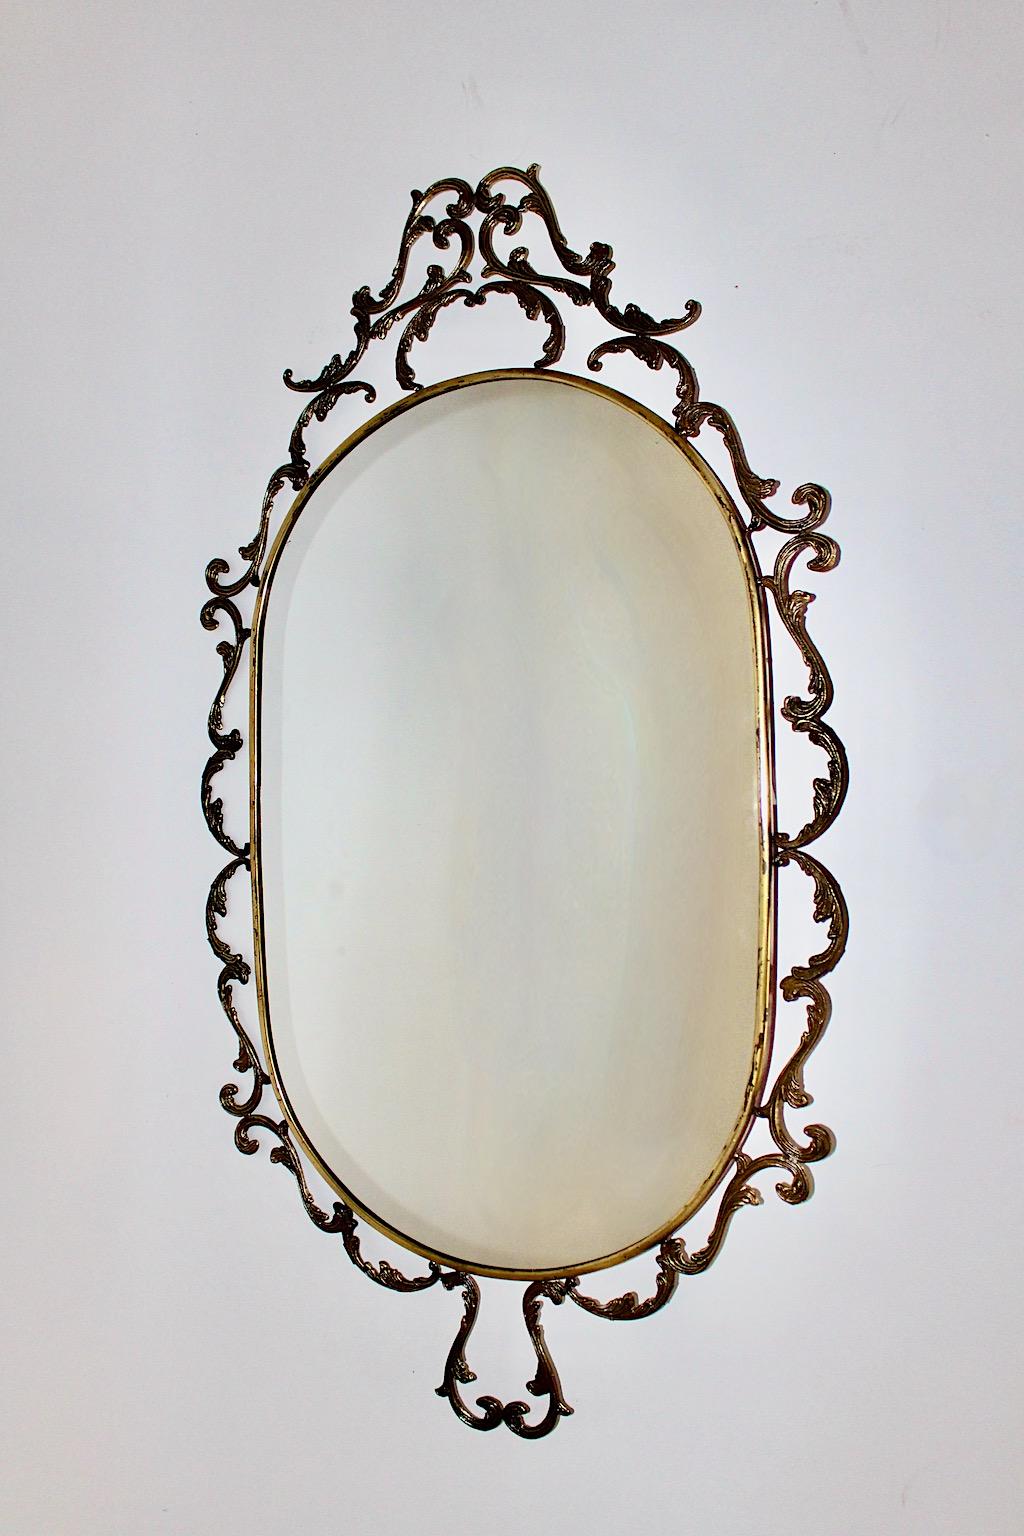 Baroque Revival Style Vintage Oval Wall Mirror Brass 1960s Italy For Sale 5